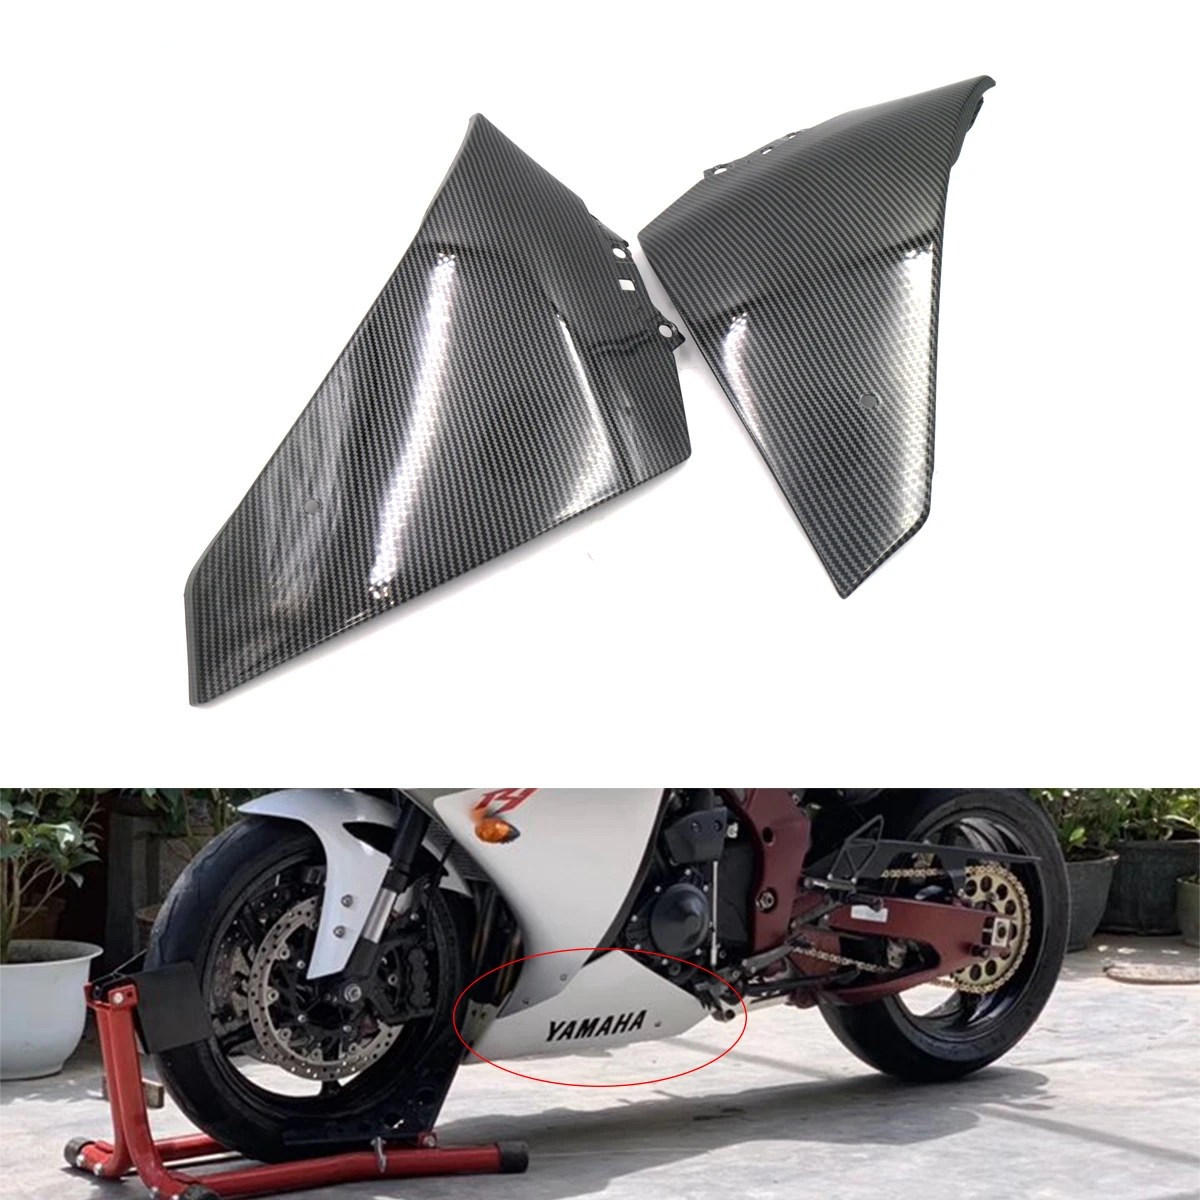 

Carbon Fiber Paint Upper Front Side Radiator Cover Fairing For Yamaha YZF R12009 2010 2012 2013 2014